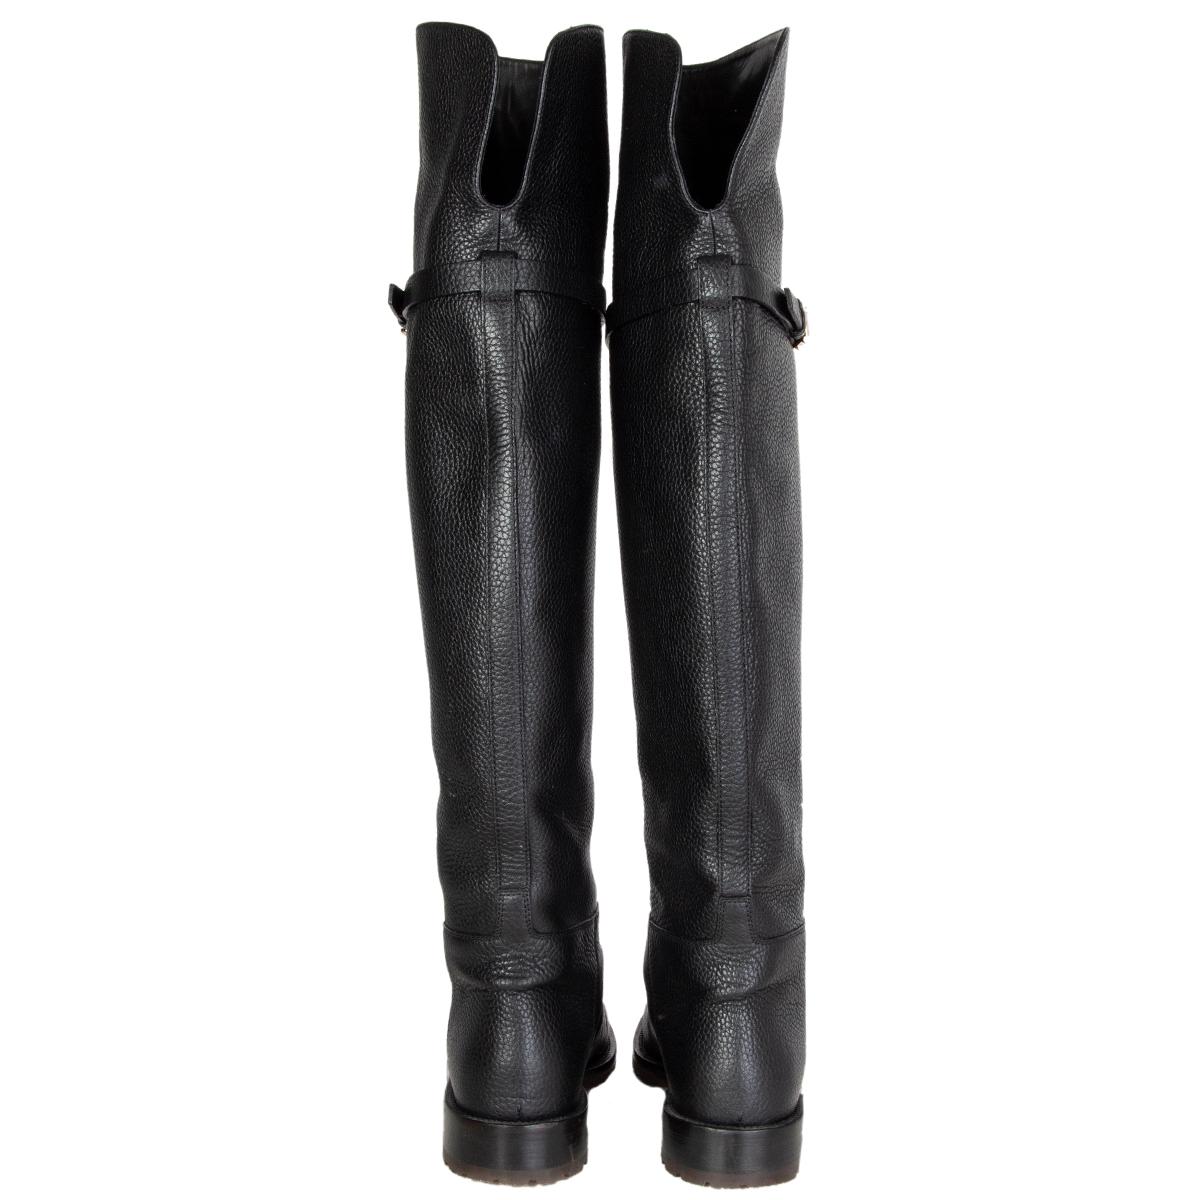 Black VALENTINO black leather OVER THE KNEE Flat Boots Shoes 38